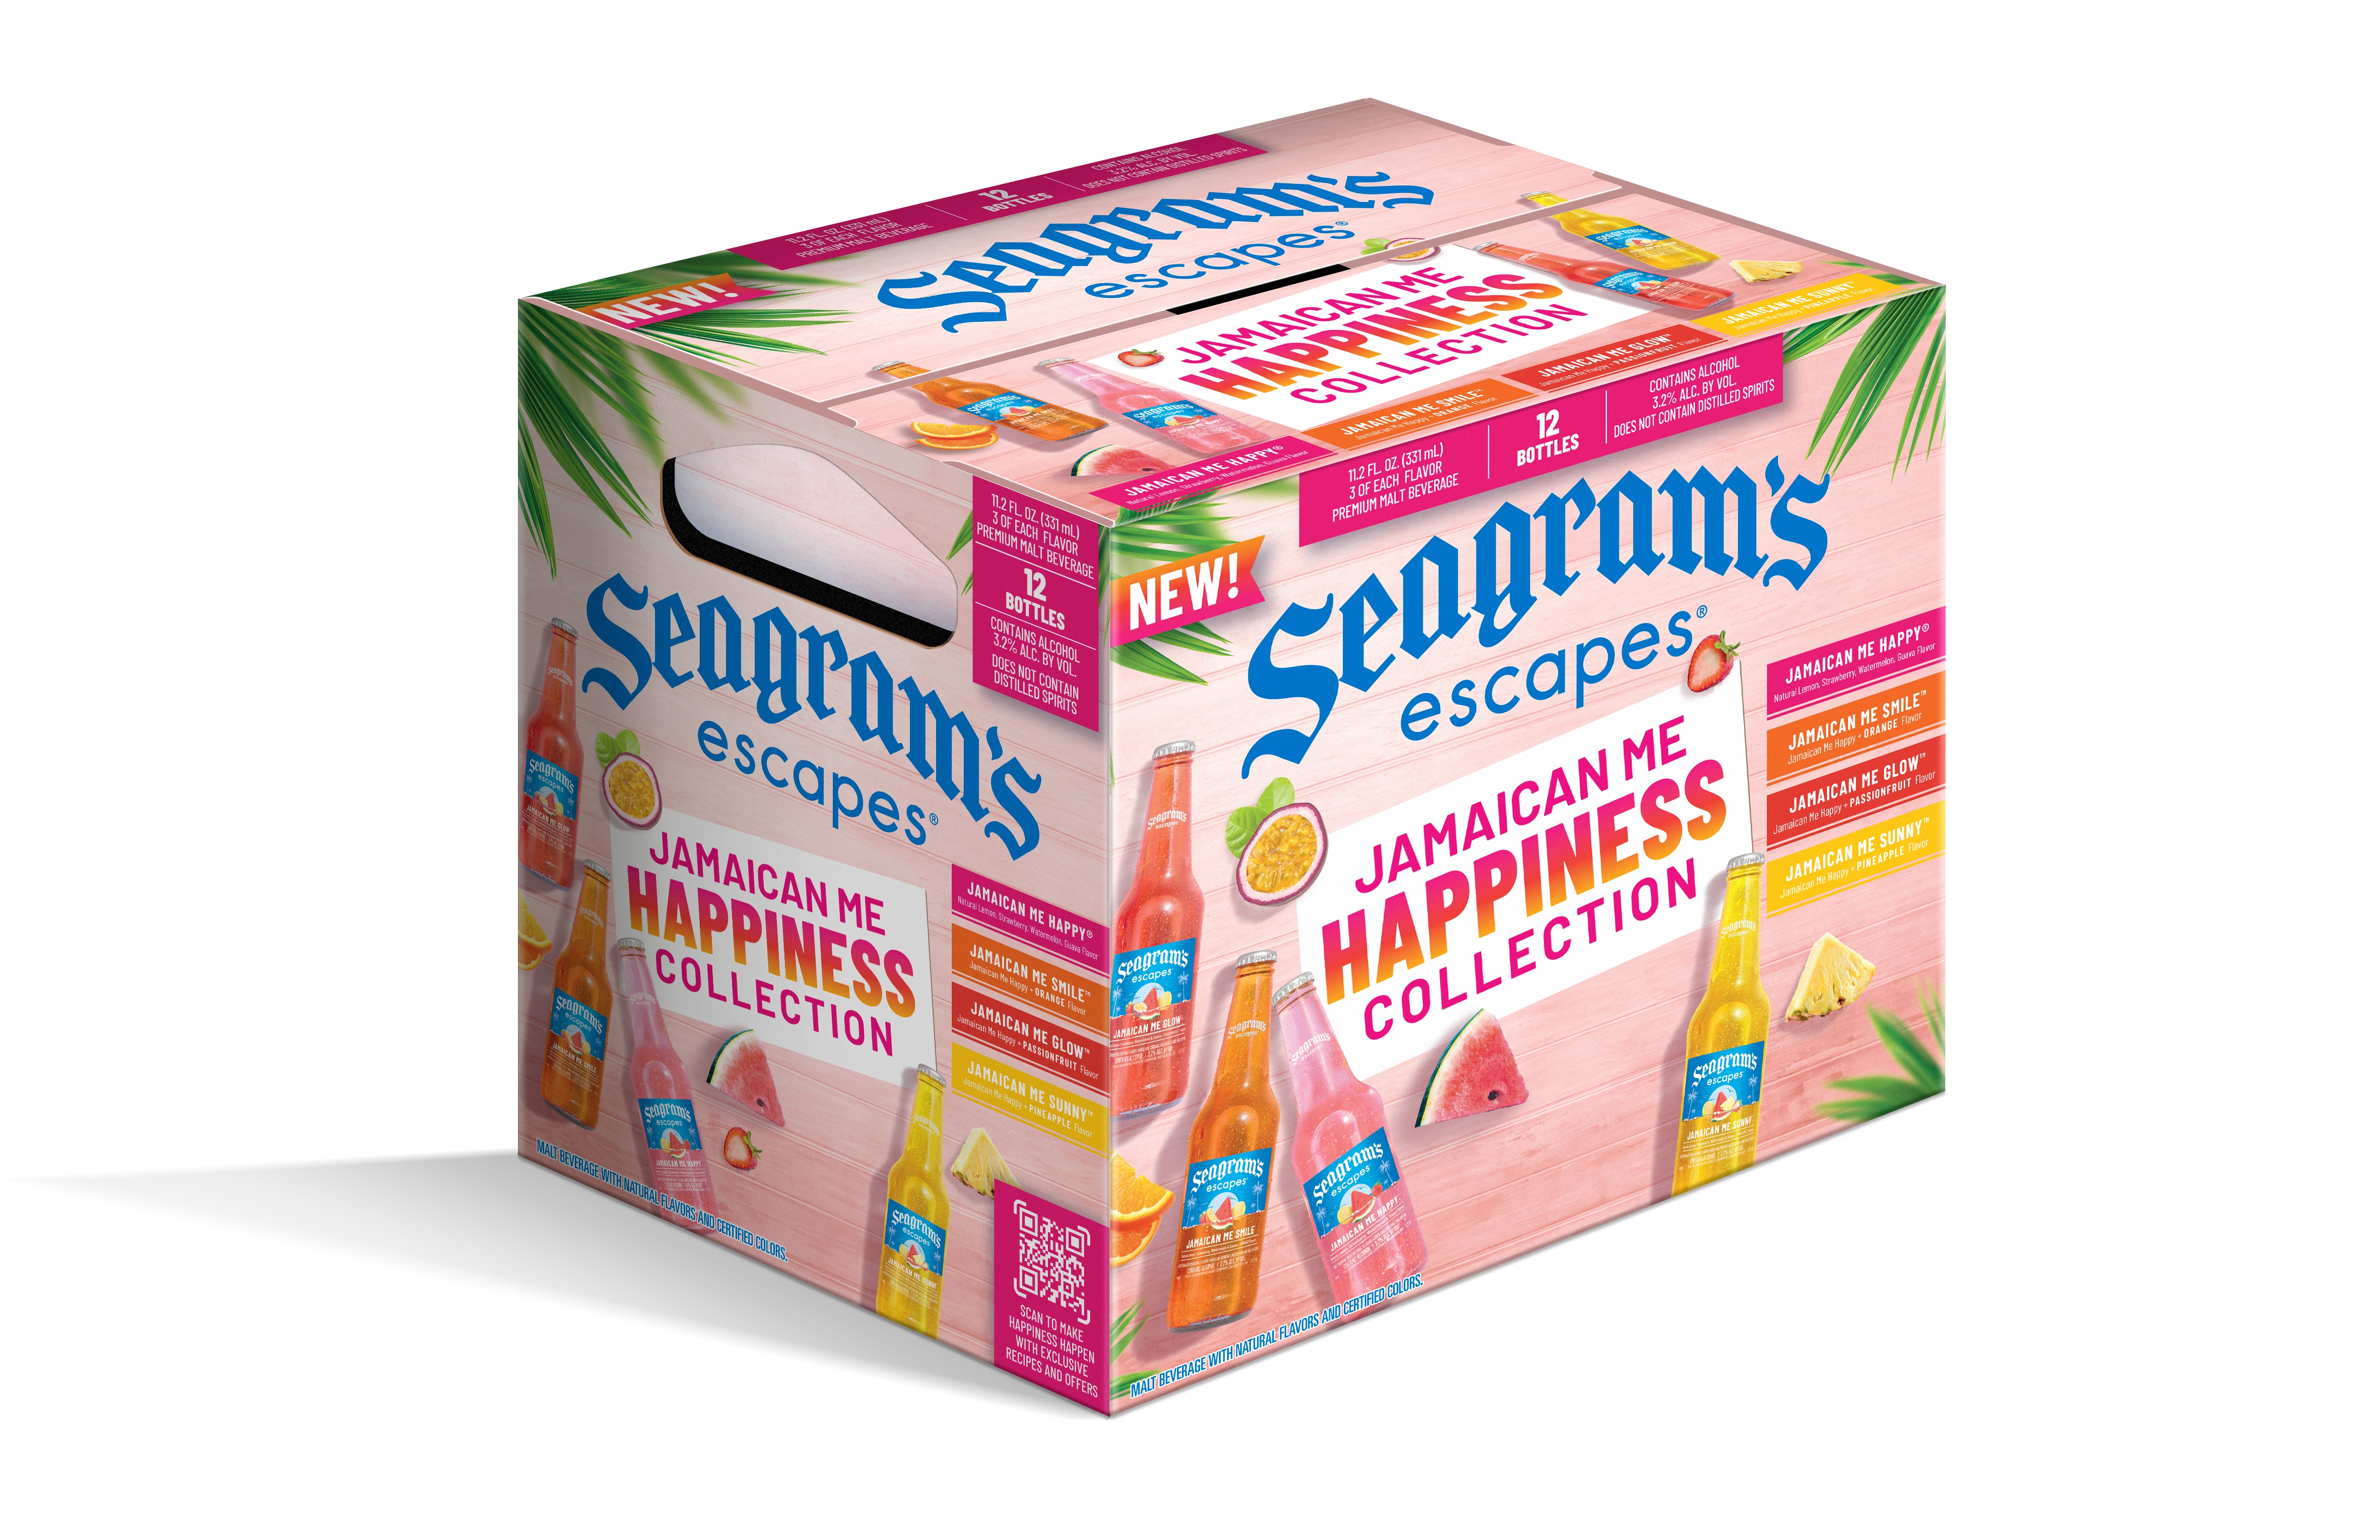 Seagram's Escapes Jamaican Me Happiness Collection, Flavored Malt Beverage, 12 pack, 11.2 fl oz Glass Bottles, 3.2% ABV - image 1 of 4